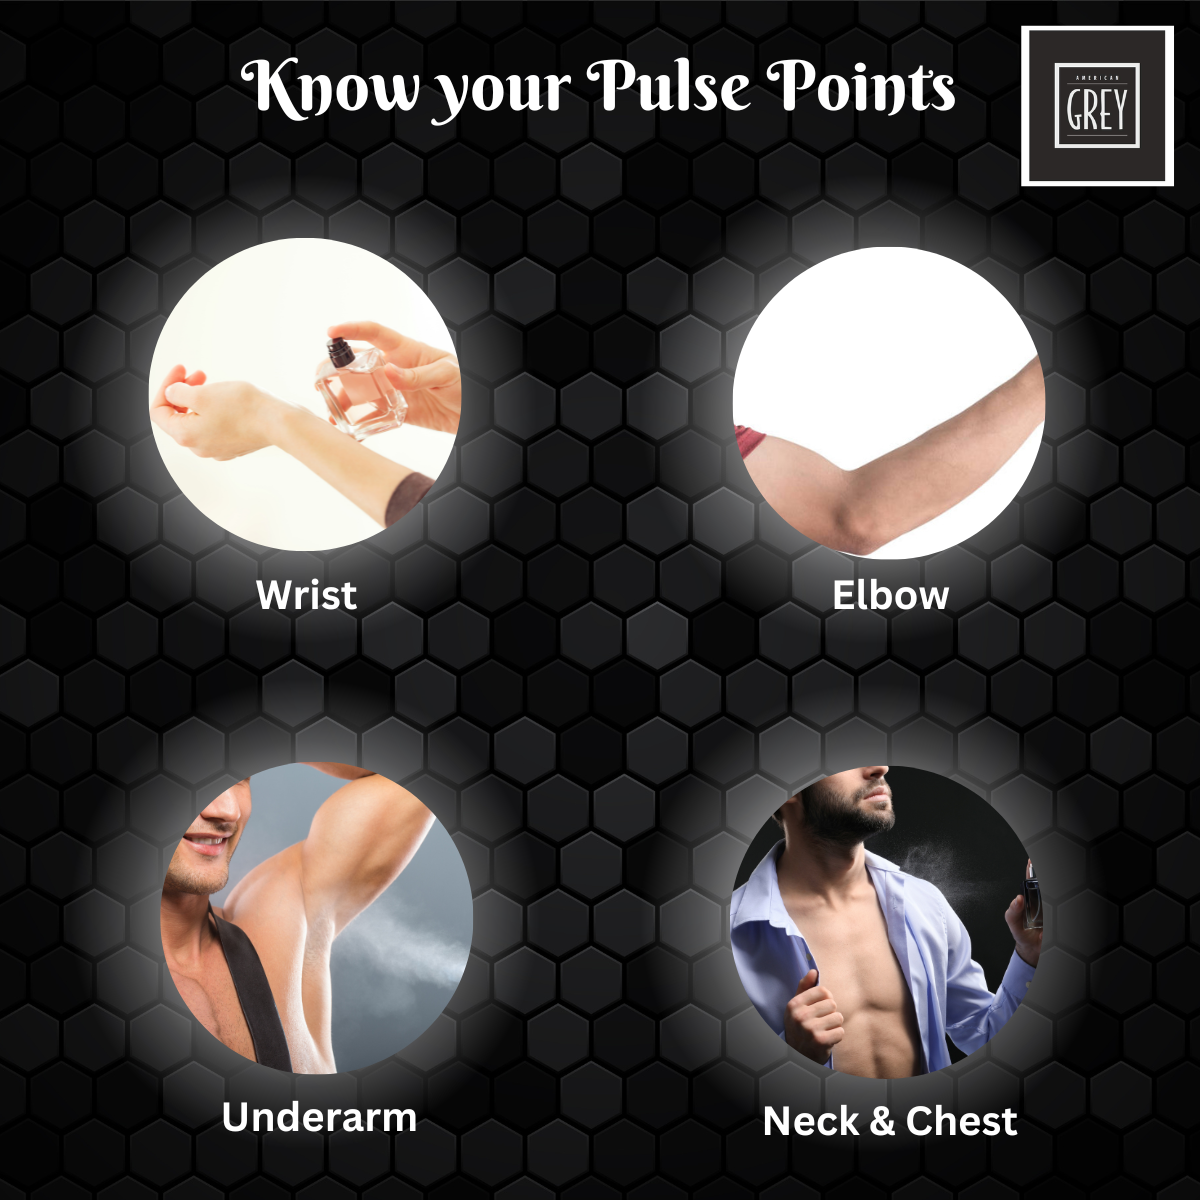 know your pulse points, pulse points, american grey infinity perfume, perfume spray, what are the pulse points to apply deodorant for men, men deodorant, deodorant spray for men, what are the pulse points for perfume male?, what is the best way to apply perfume for men?, where are male pulse points, deodorant tips for men, deodorant tips for male in India, perfume pulse points myths, best pulse points for perfume male